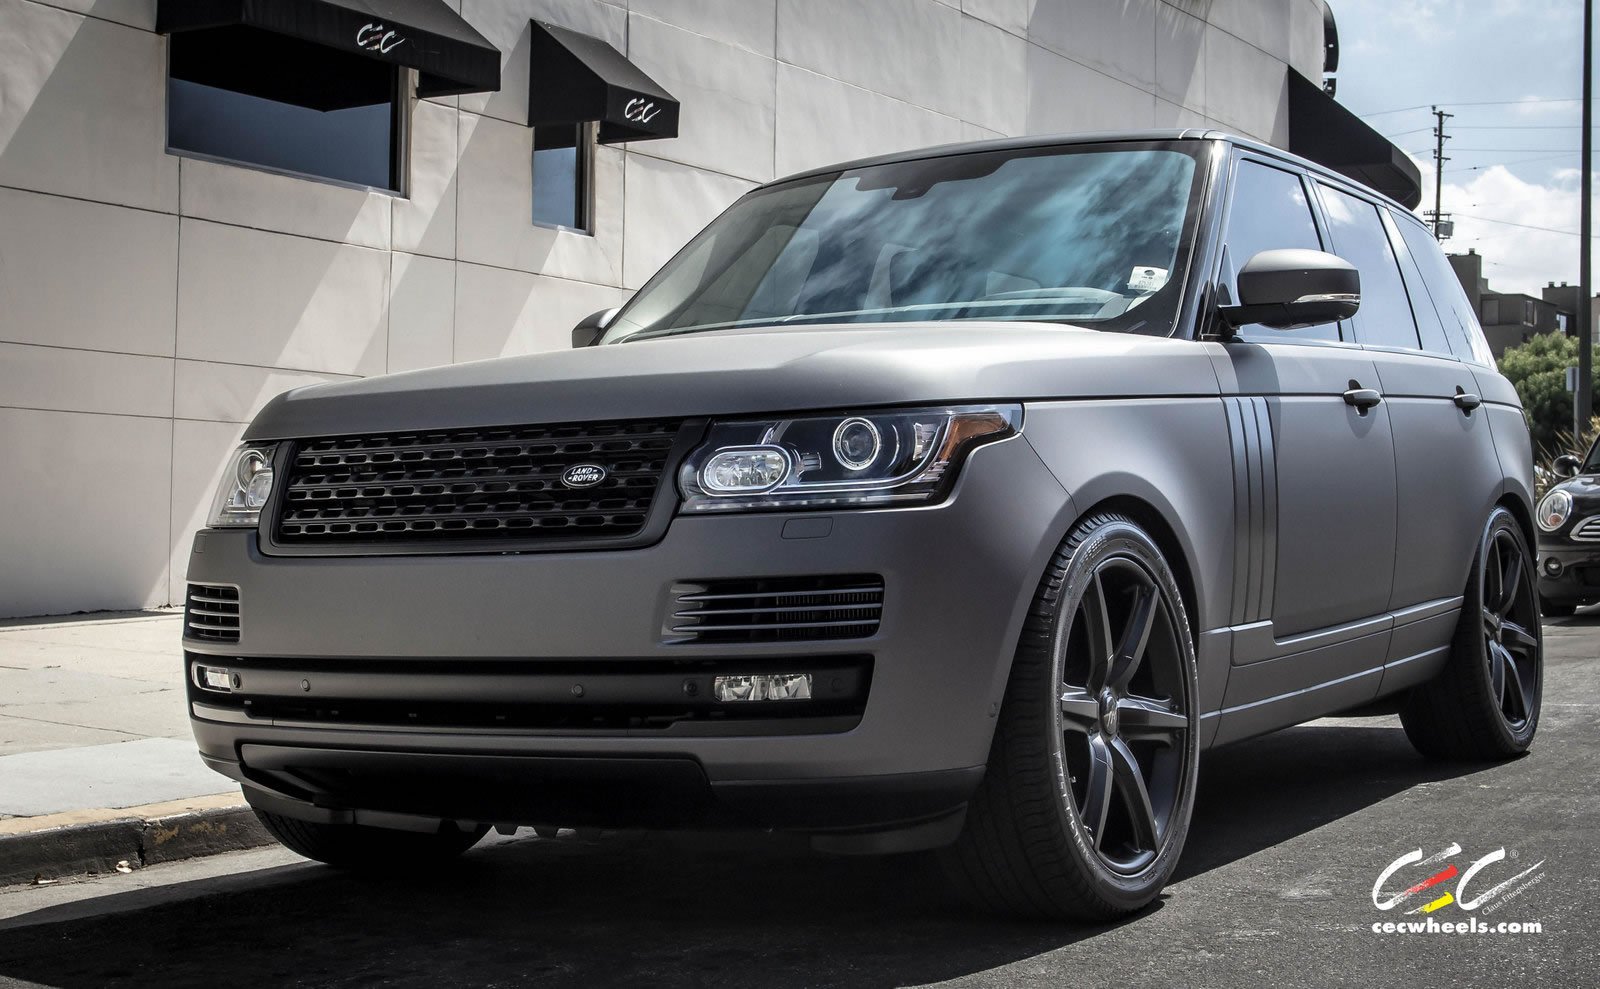 2015, Cec, Wheels, Tuning, Cars, Suv, Range, Rover, Supercharged Wallpaper